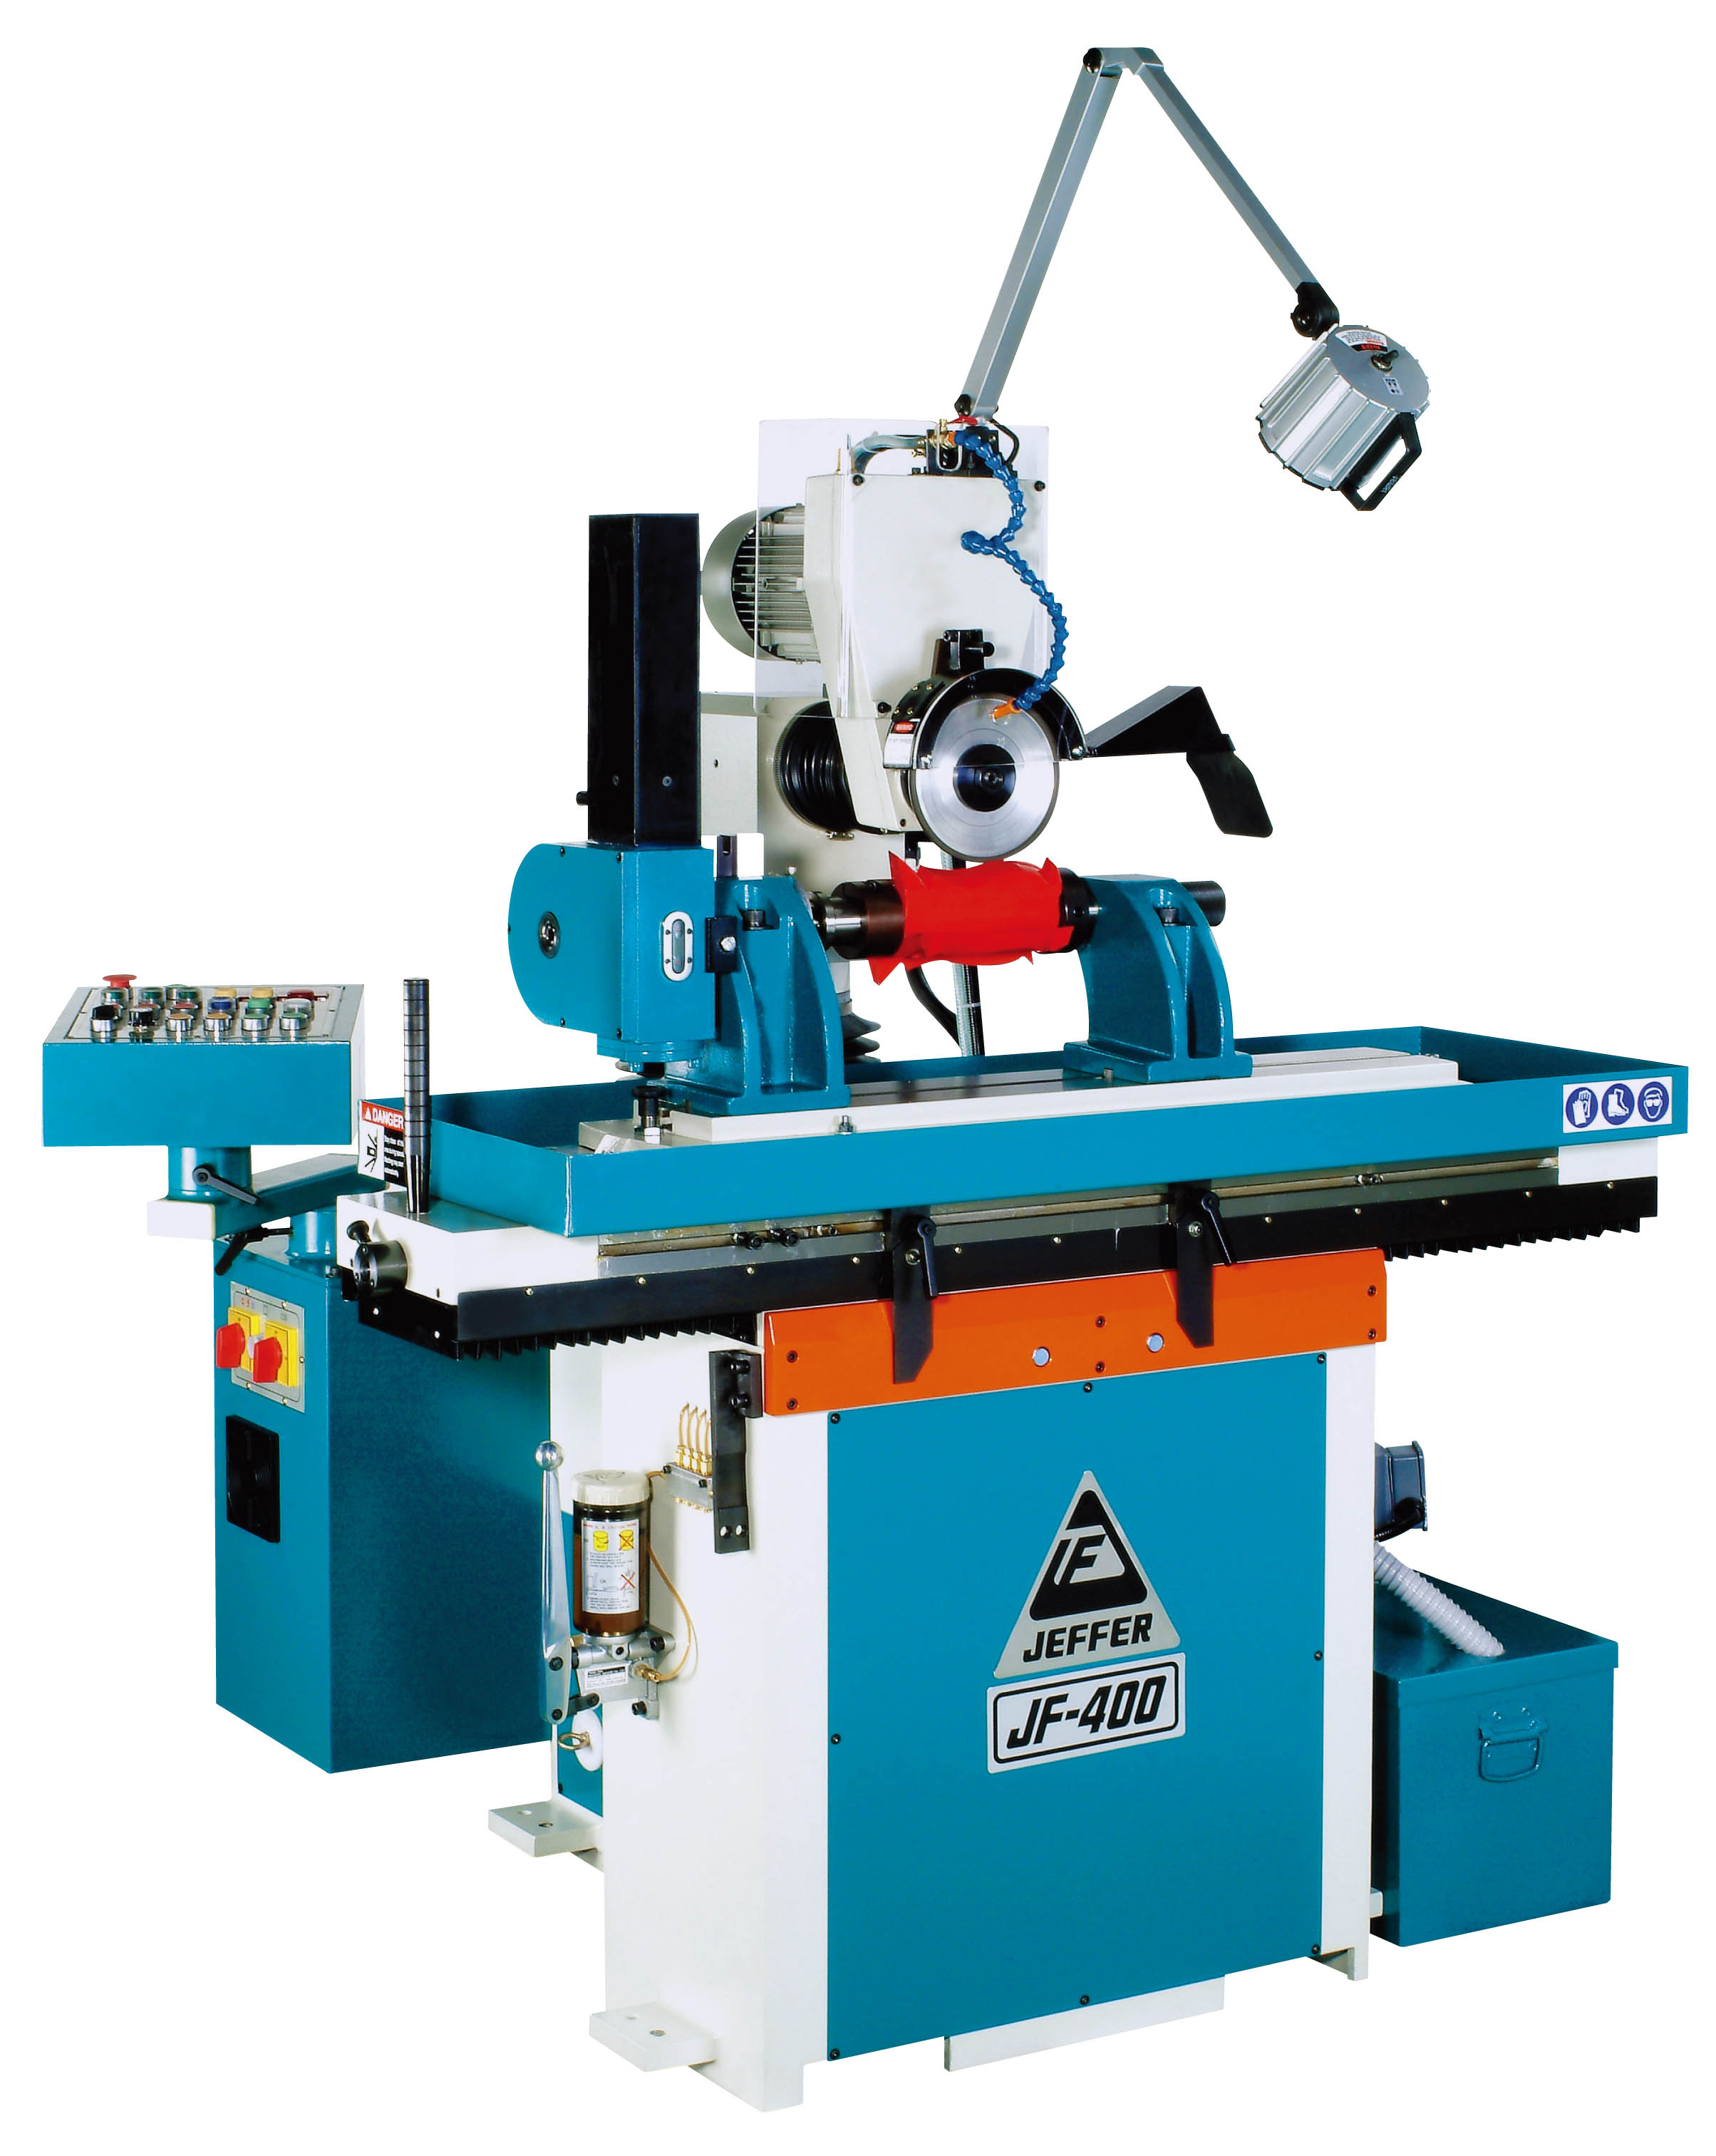 JF-400 AUTOMATIC TOOL GRINDER